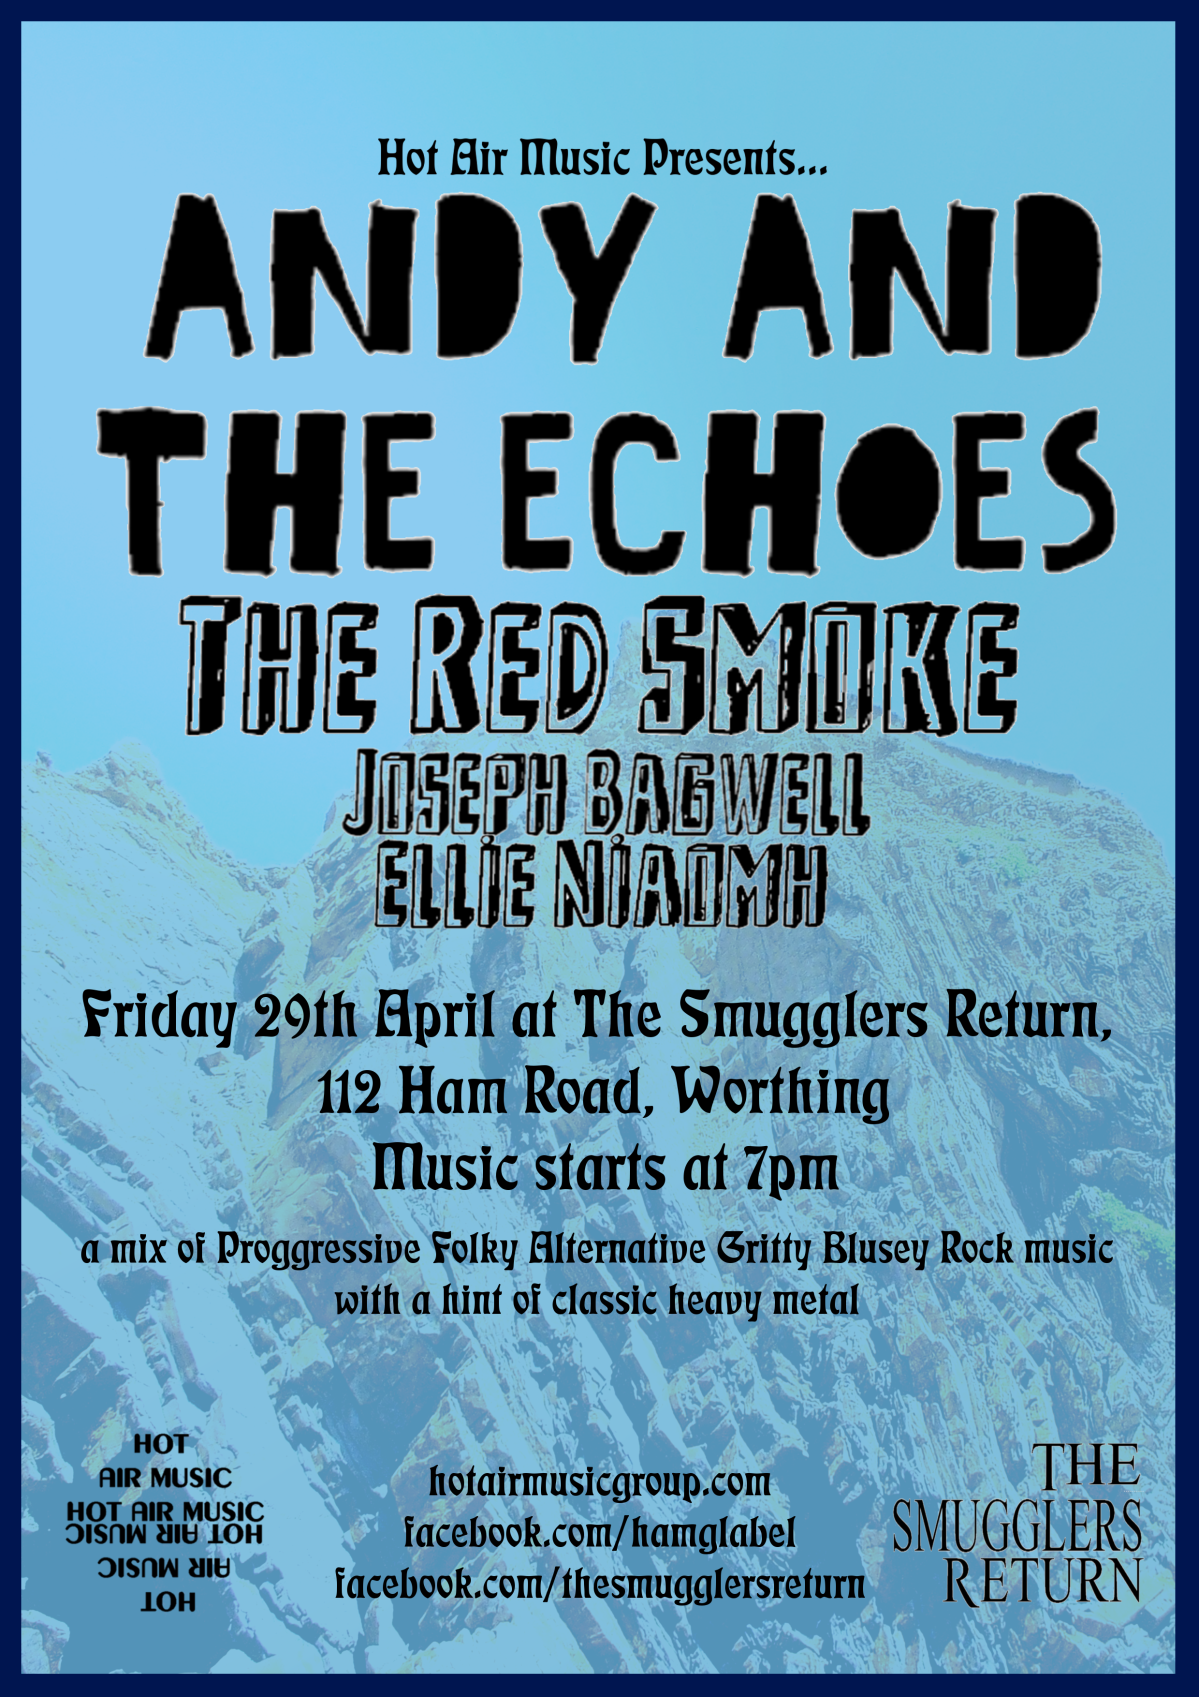 Andy and the Echoes @ The Smugglers Return